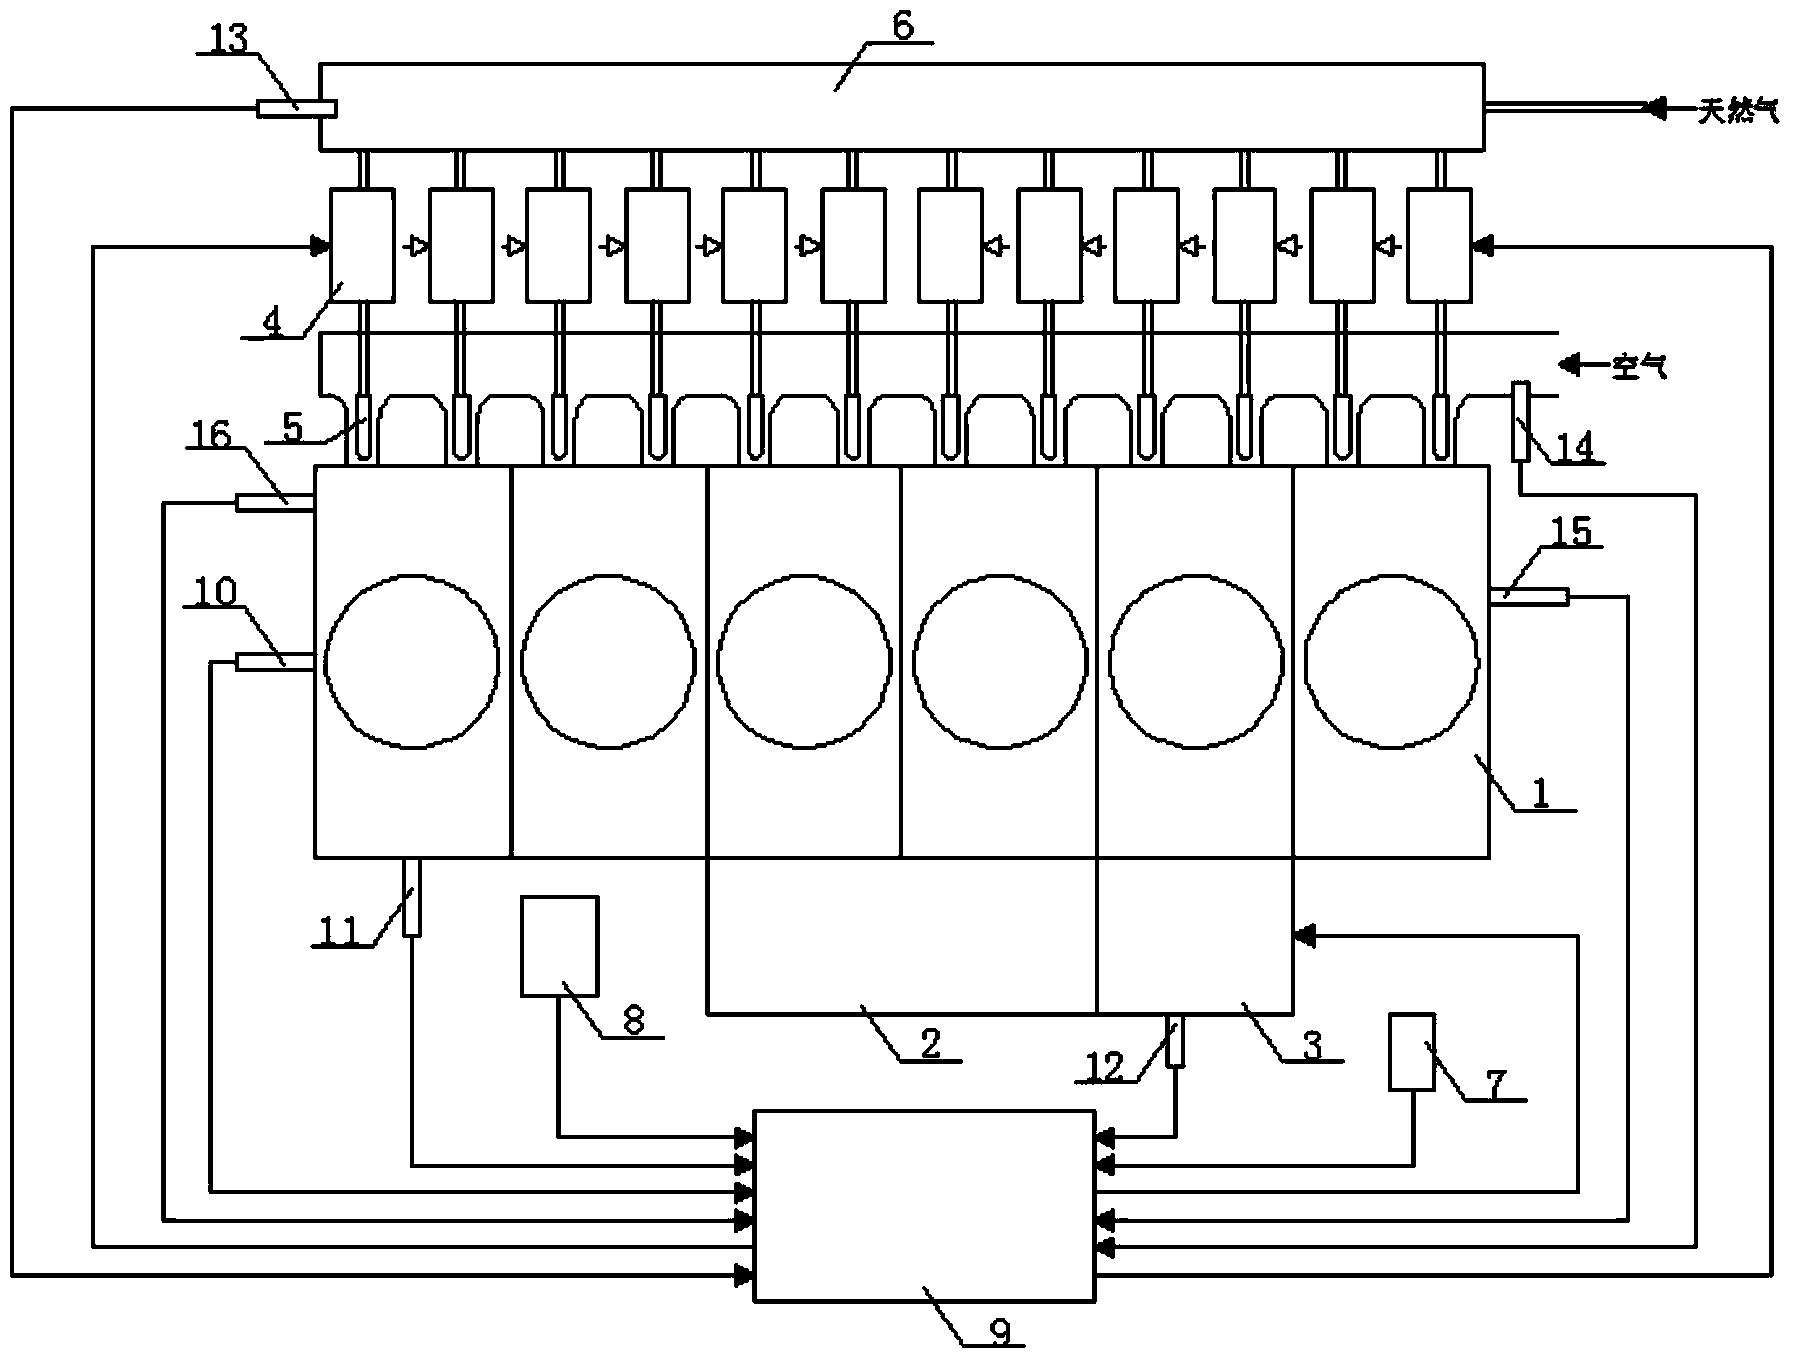 Ship dual-fuel-engine speed control system and method